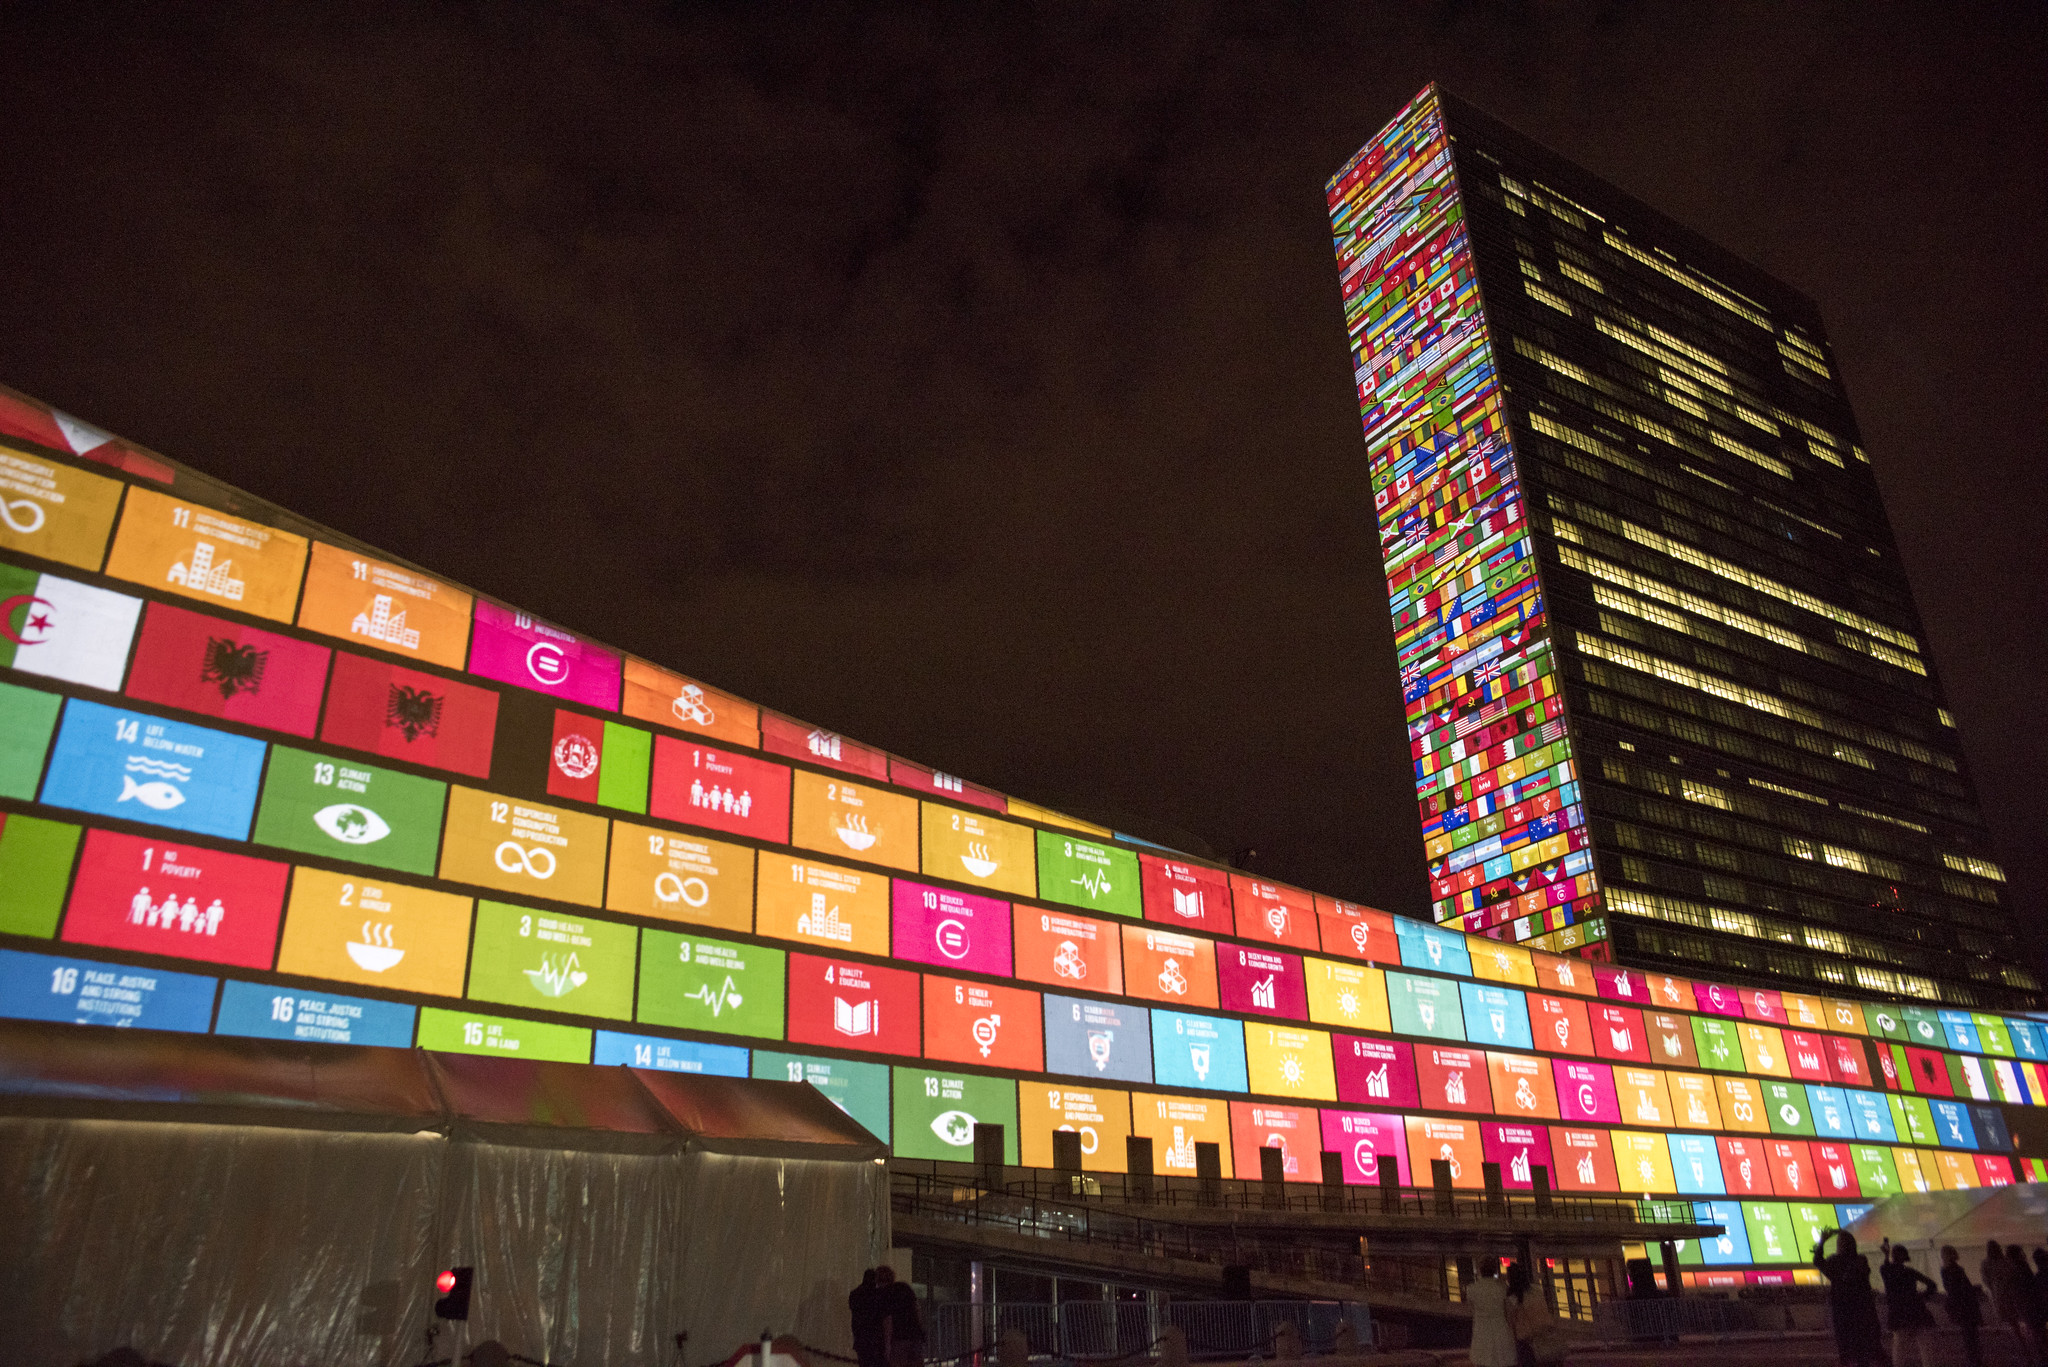 The United Nations building in New York during the 70th session of the United Nations General Assembly, when the Sustainable Development Goals were agreed. Credit: United Nations Photo.